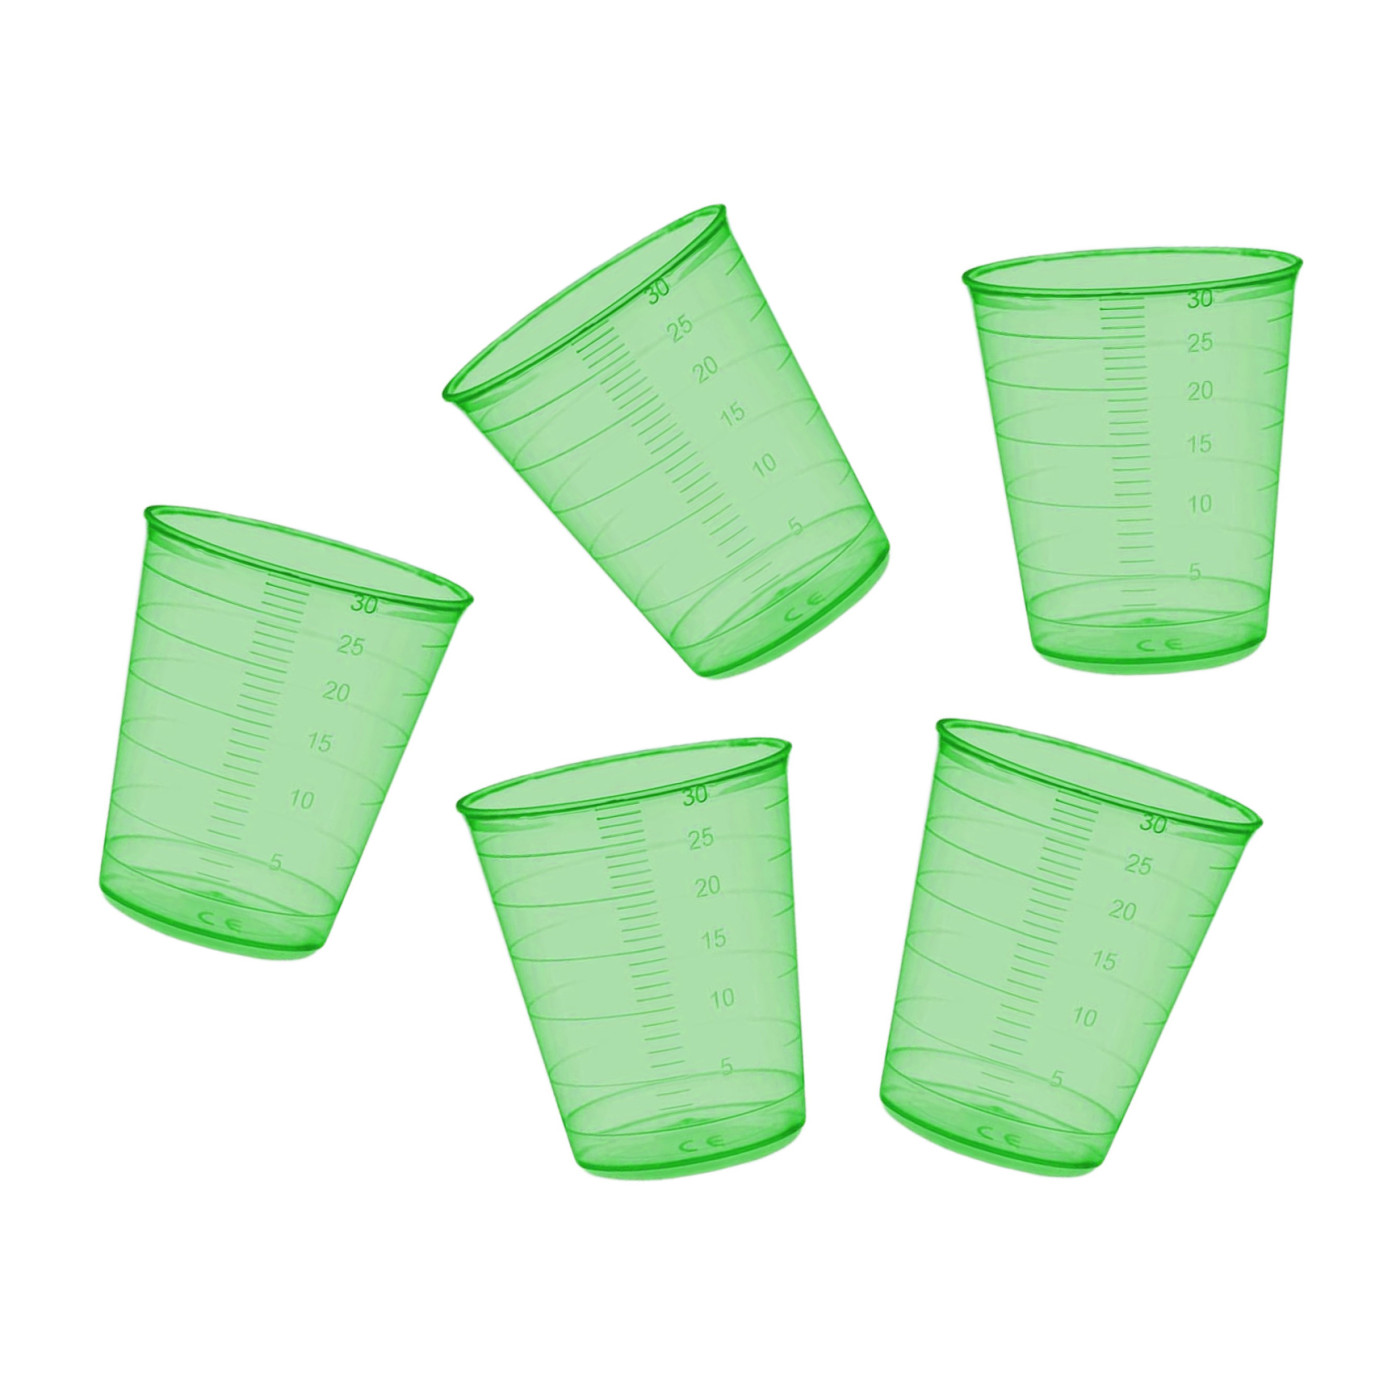 https://www.woodtoolsanddeco.com/11293-large_default/set-of-160-measuring-cups-30-ml-green-pp-for-frequent-use.jpg